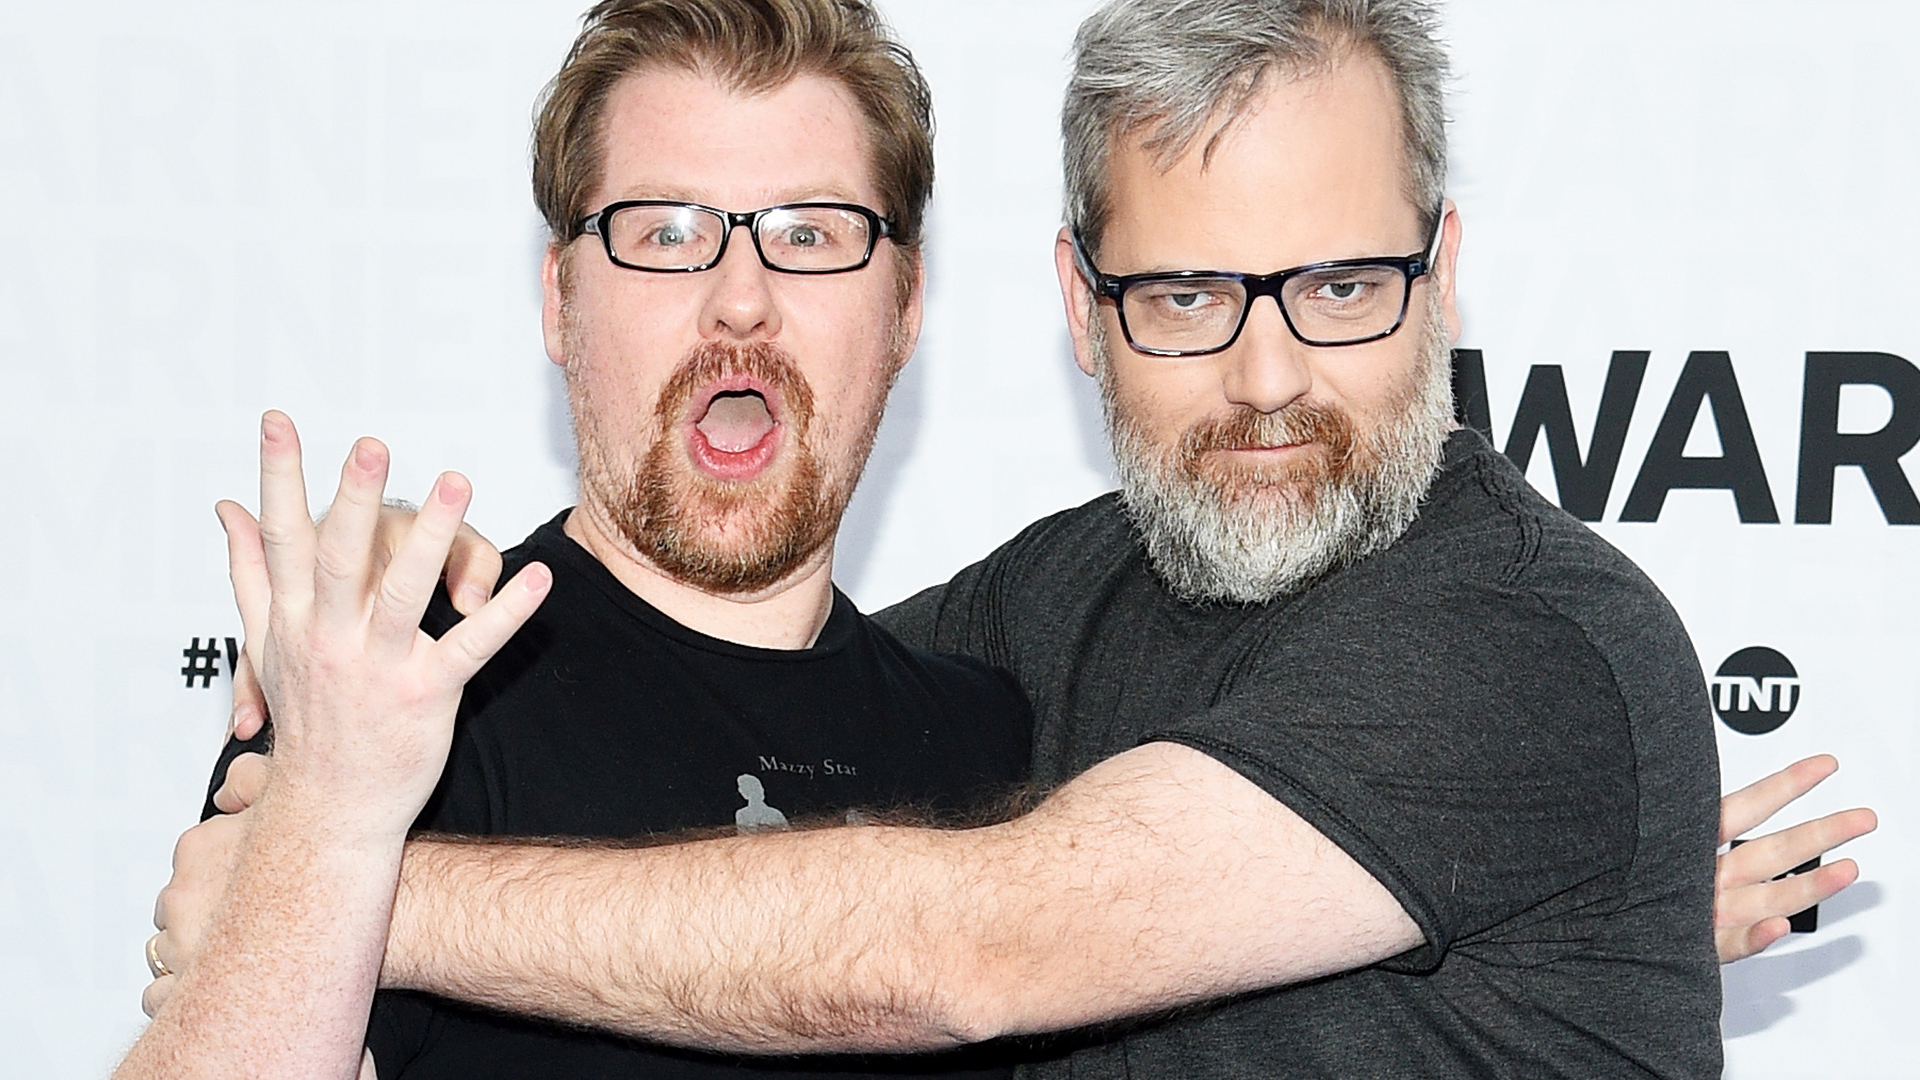 Justin Roiland and Dan Harmon of Adult Swim’s Rick and Morty attend the WarnerMedia Upfront 2019 arrivals on the red carpet at The Theater at Madison Square Garden on May 15, 2019 in New York City.